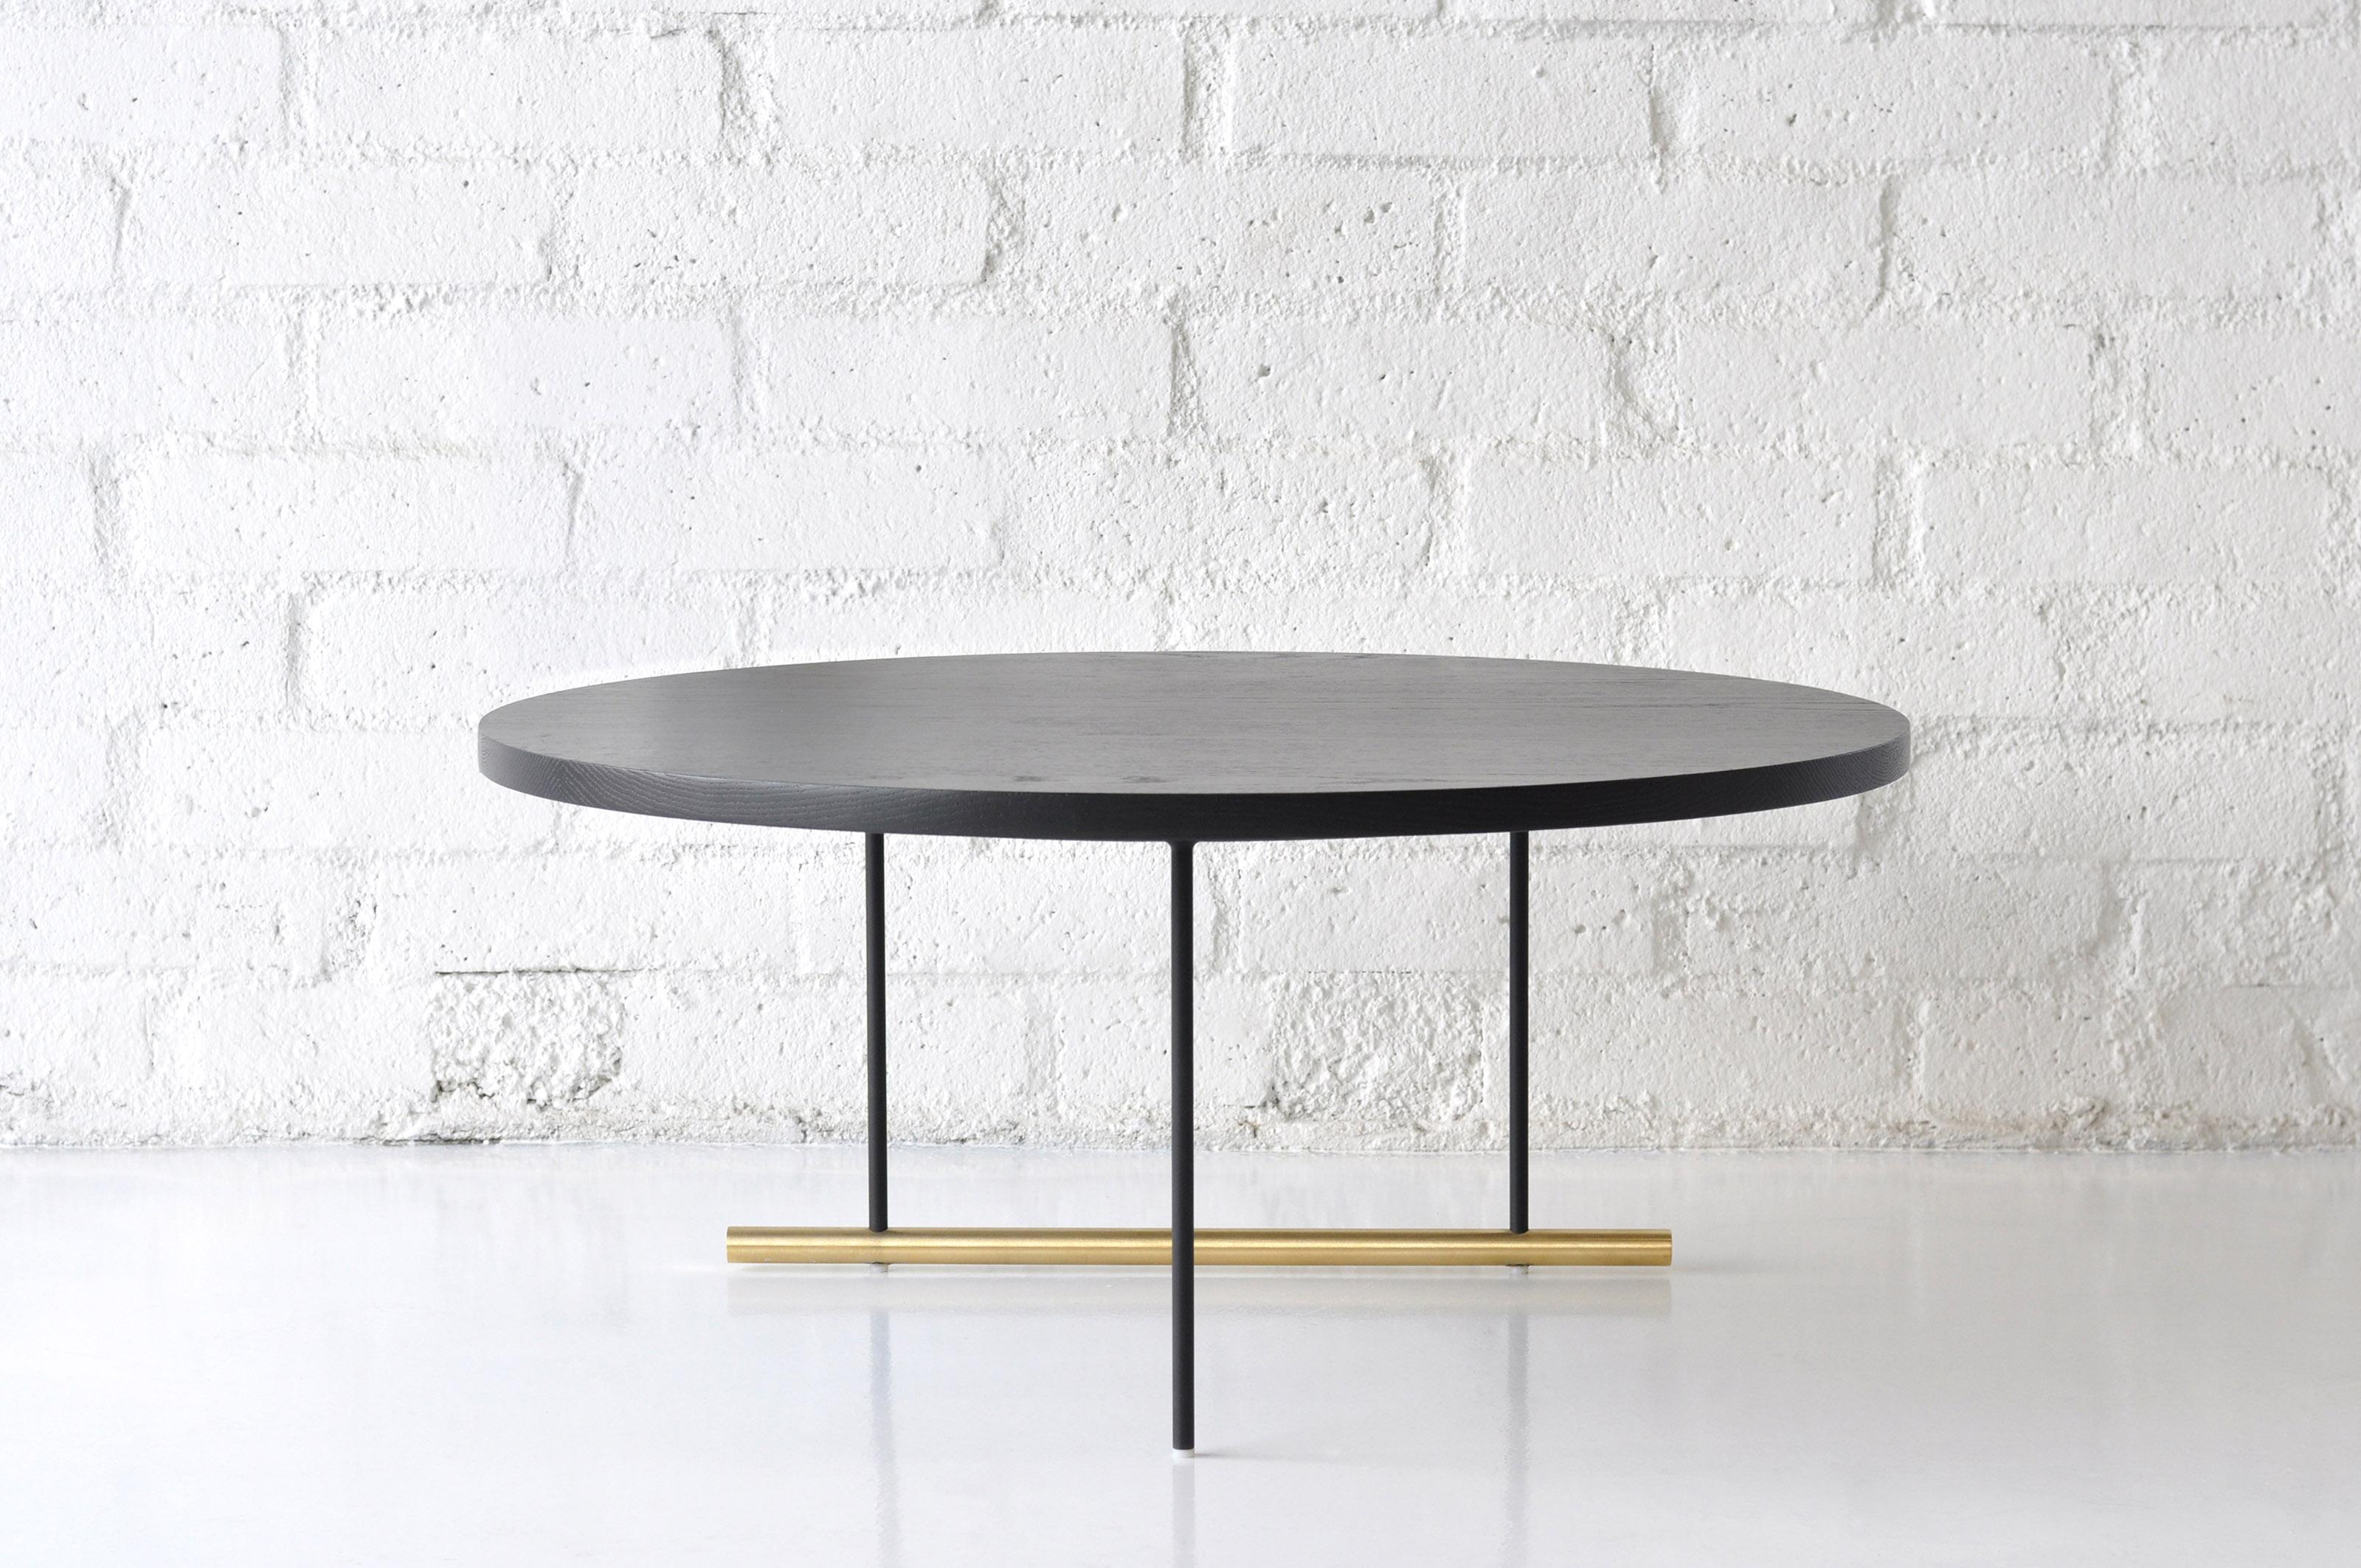 Icon Large Ebonized Oak Coffee Table by Phase Design
Dimensions: Ø 88.9 x H 38.1 cm. 
Materials: Ebonized oak, powder-coated metal and brushed brass.

Solid steel and brass with glass, marble, or solid wooden tops. Steel bar available in a flat